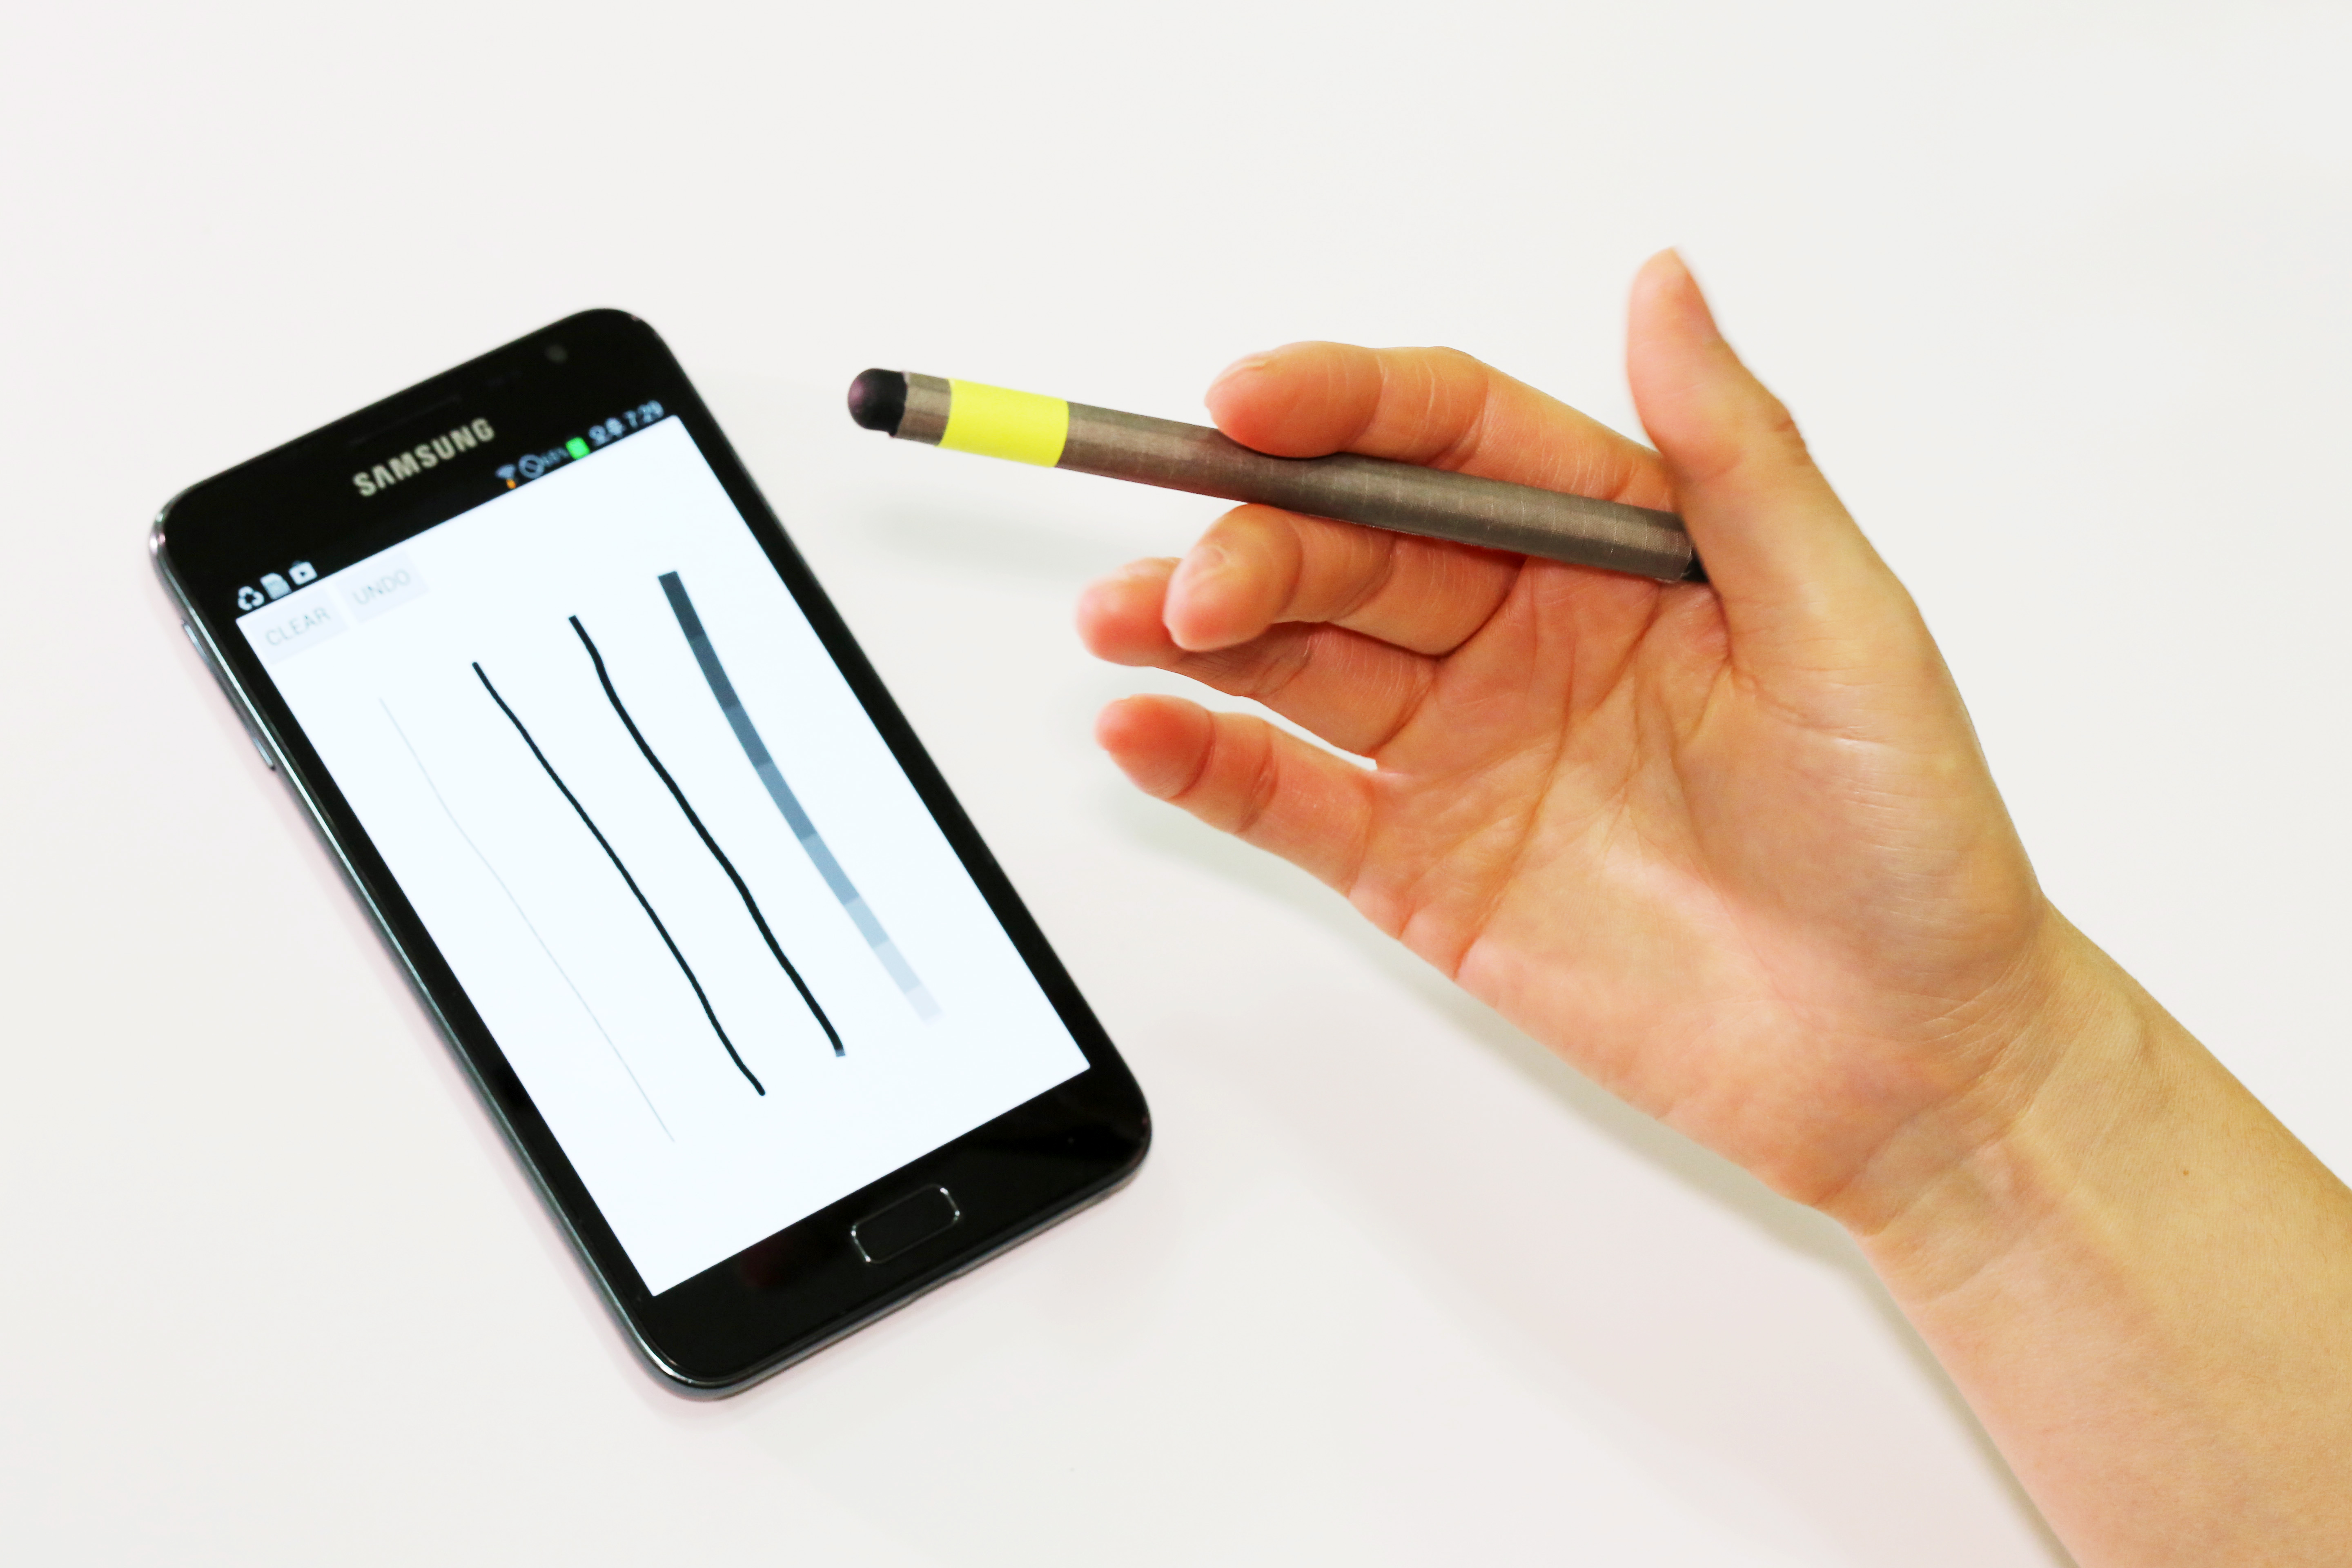 A magnetic pen for smartphones adds another level of conveniences 이미지